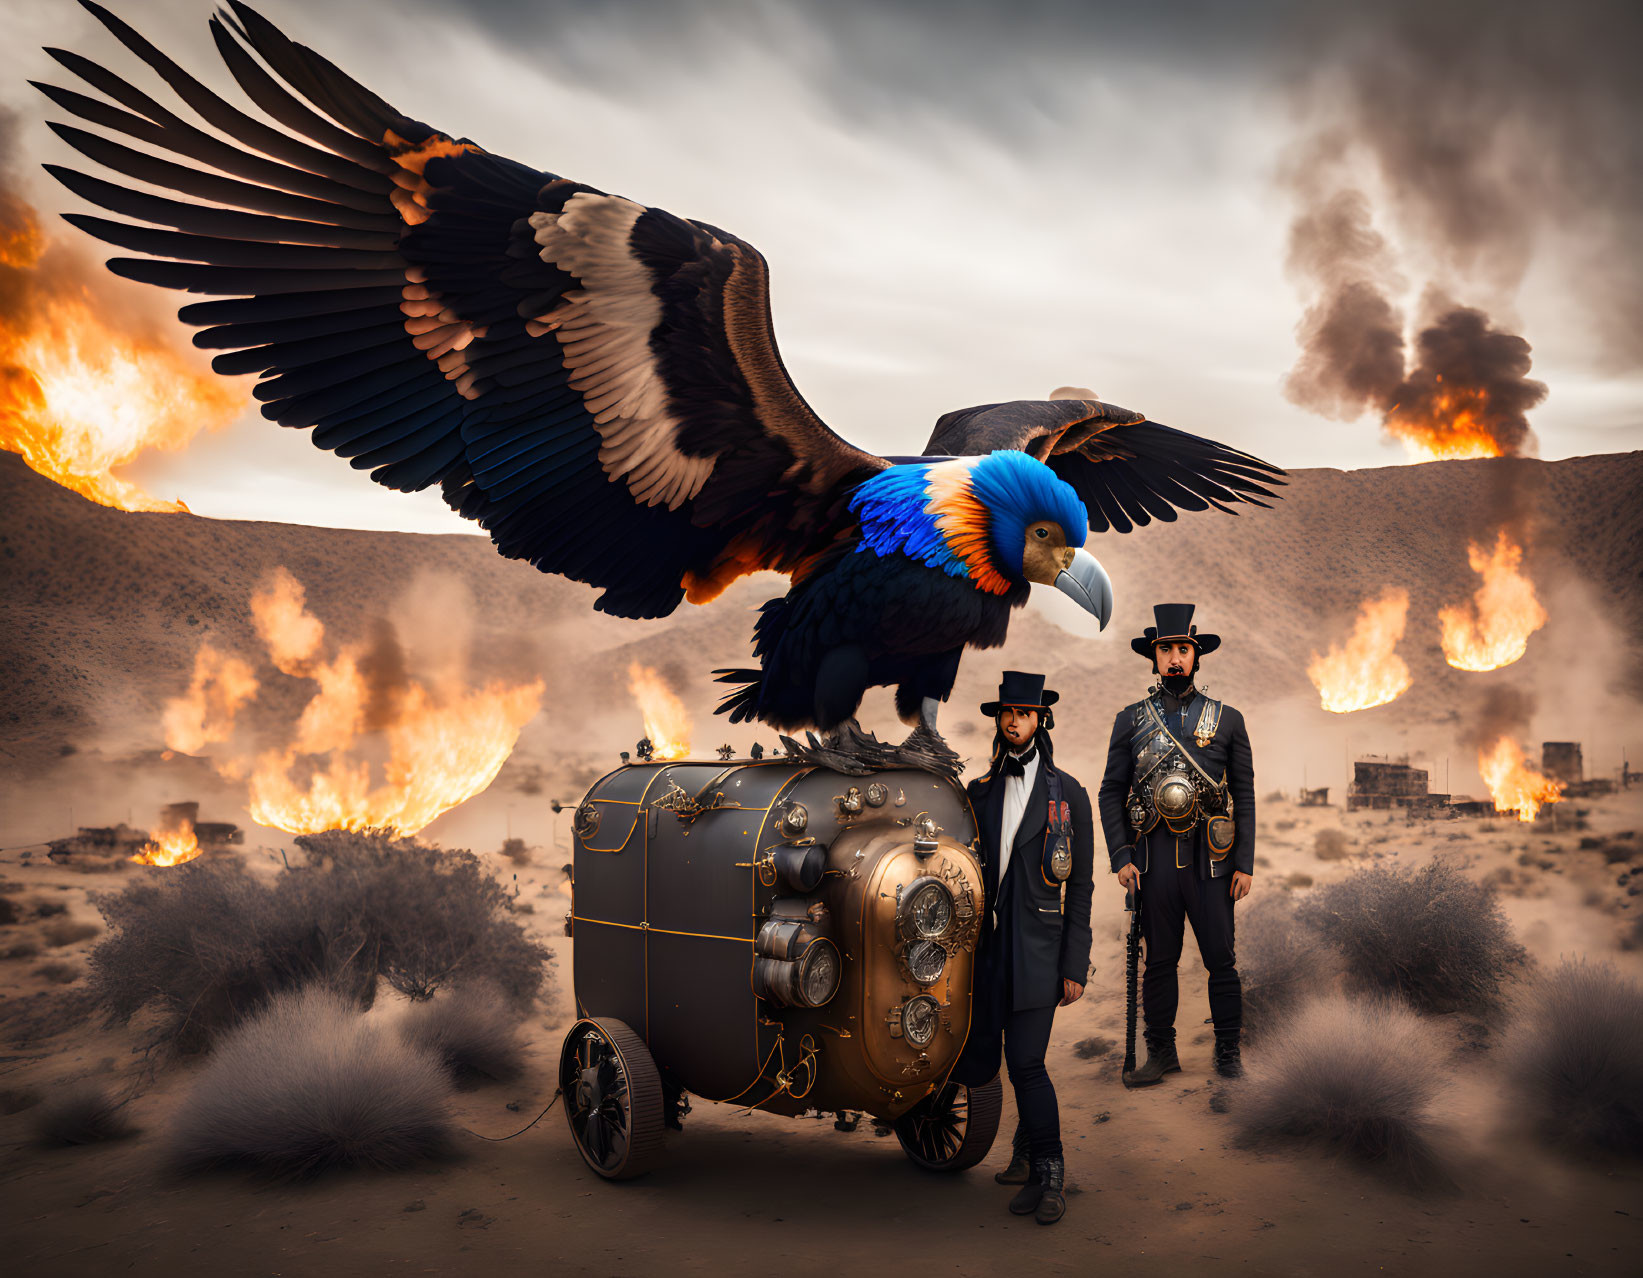 Steampunk-themed desert scene with individuals, fire, and fantastical bird.